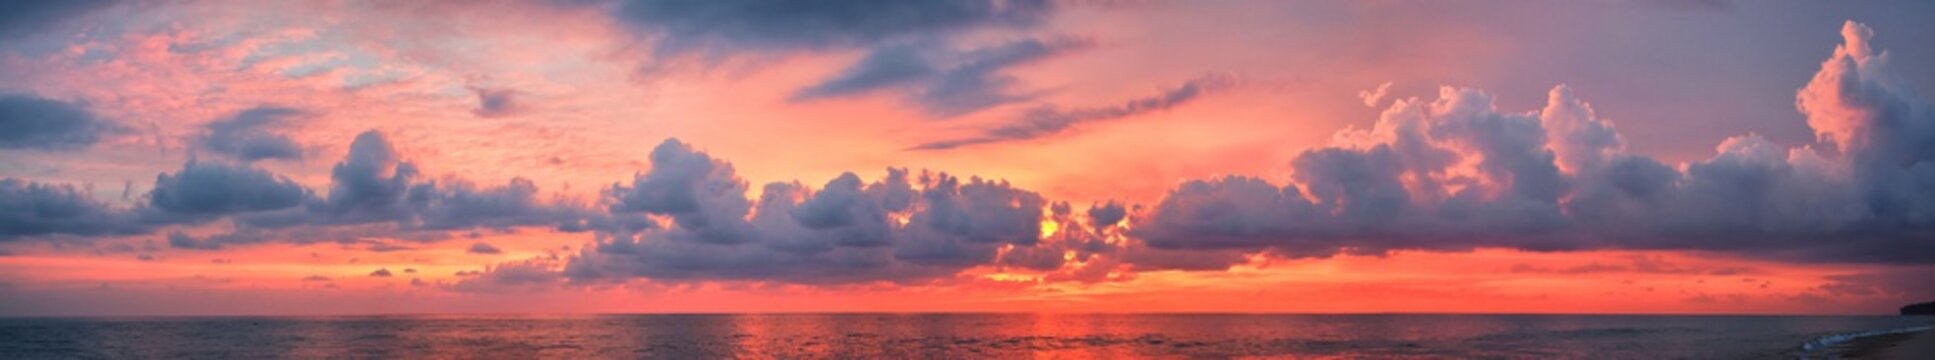 Phuket beach sunset, colorful cloudy twilight sky reflecting on the sand gazing at the Indian Ocean, Thailand, Asia.